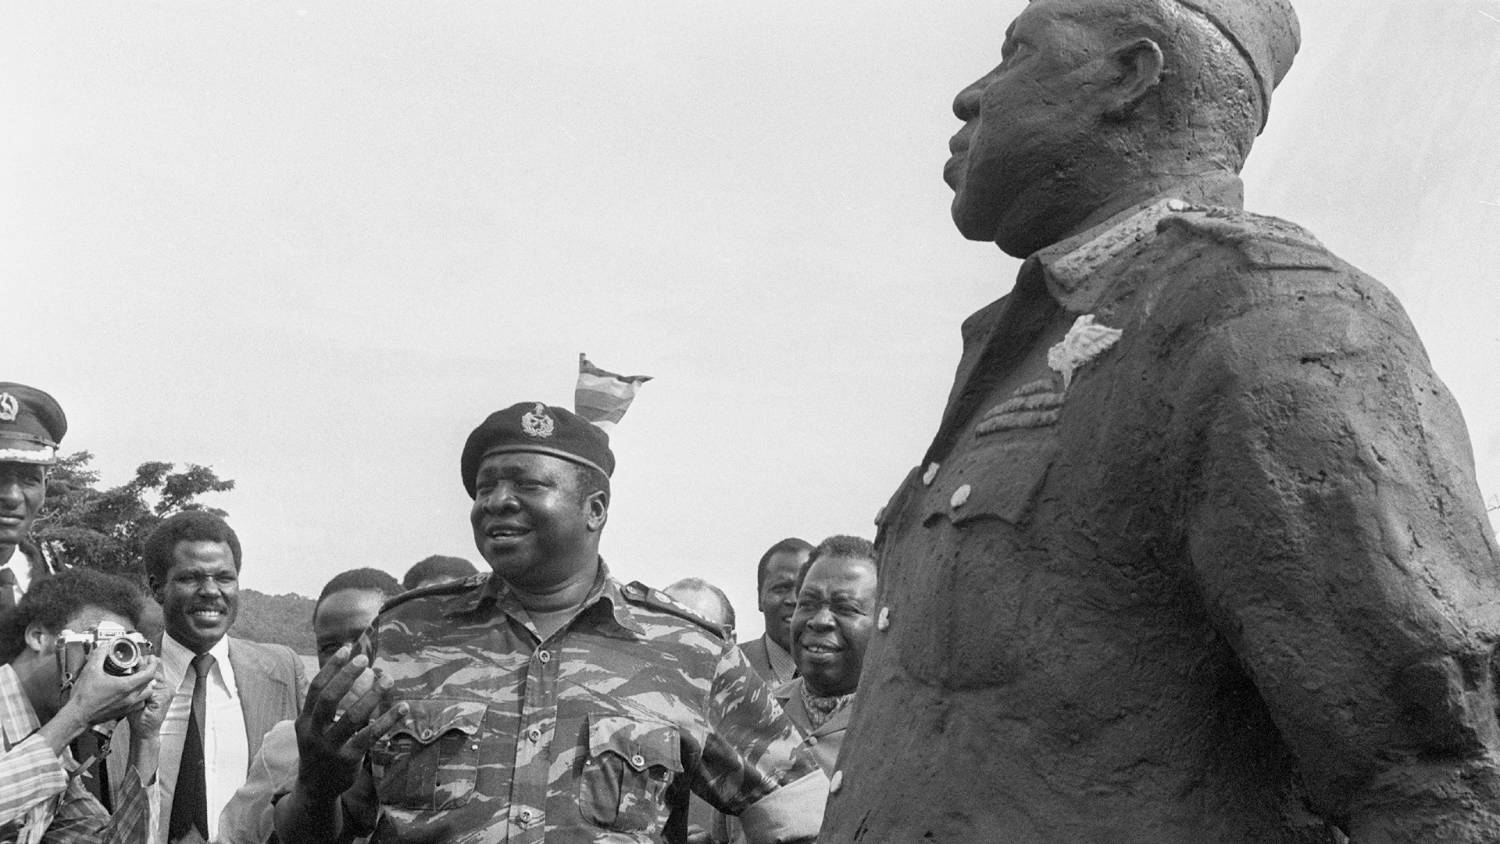 Idi Amin (centre) blamed Uganda's economic woes on the Asian community, who he accused of exploiting indigenous Africans (AFP)